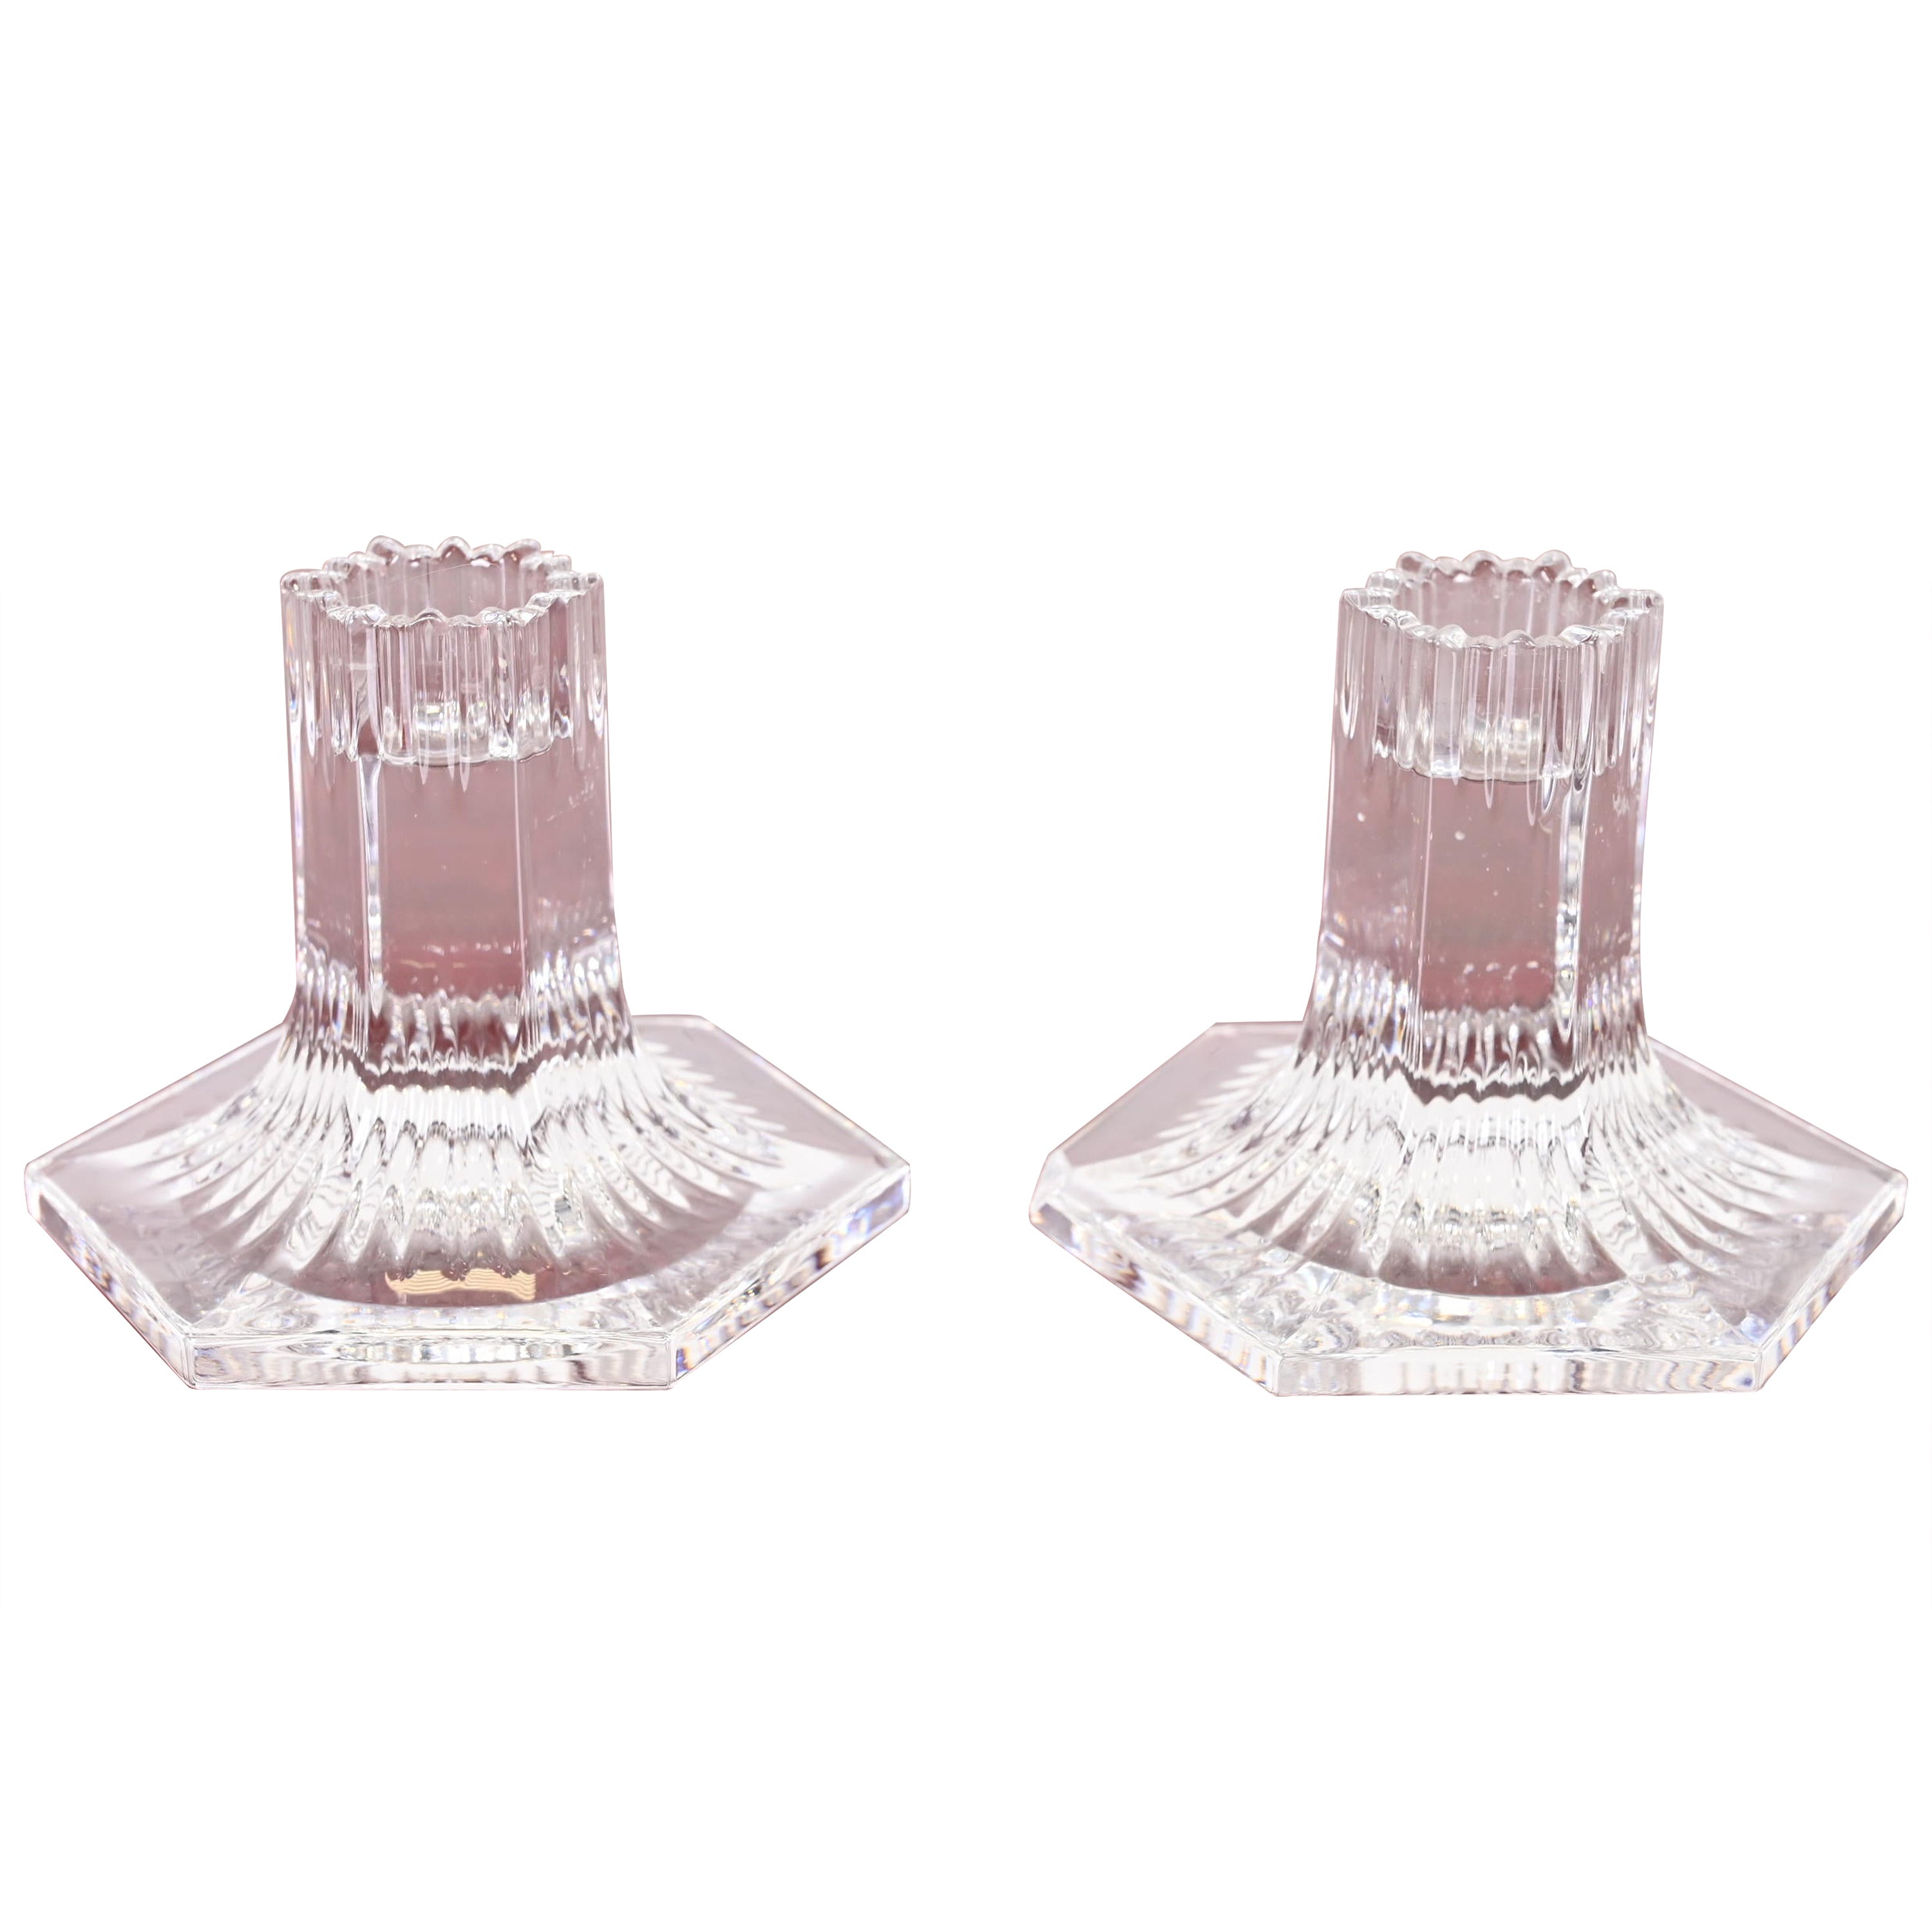 Tiffany & Co. Clear Crystal Candlesticks, Pair For Sale